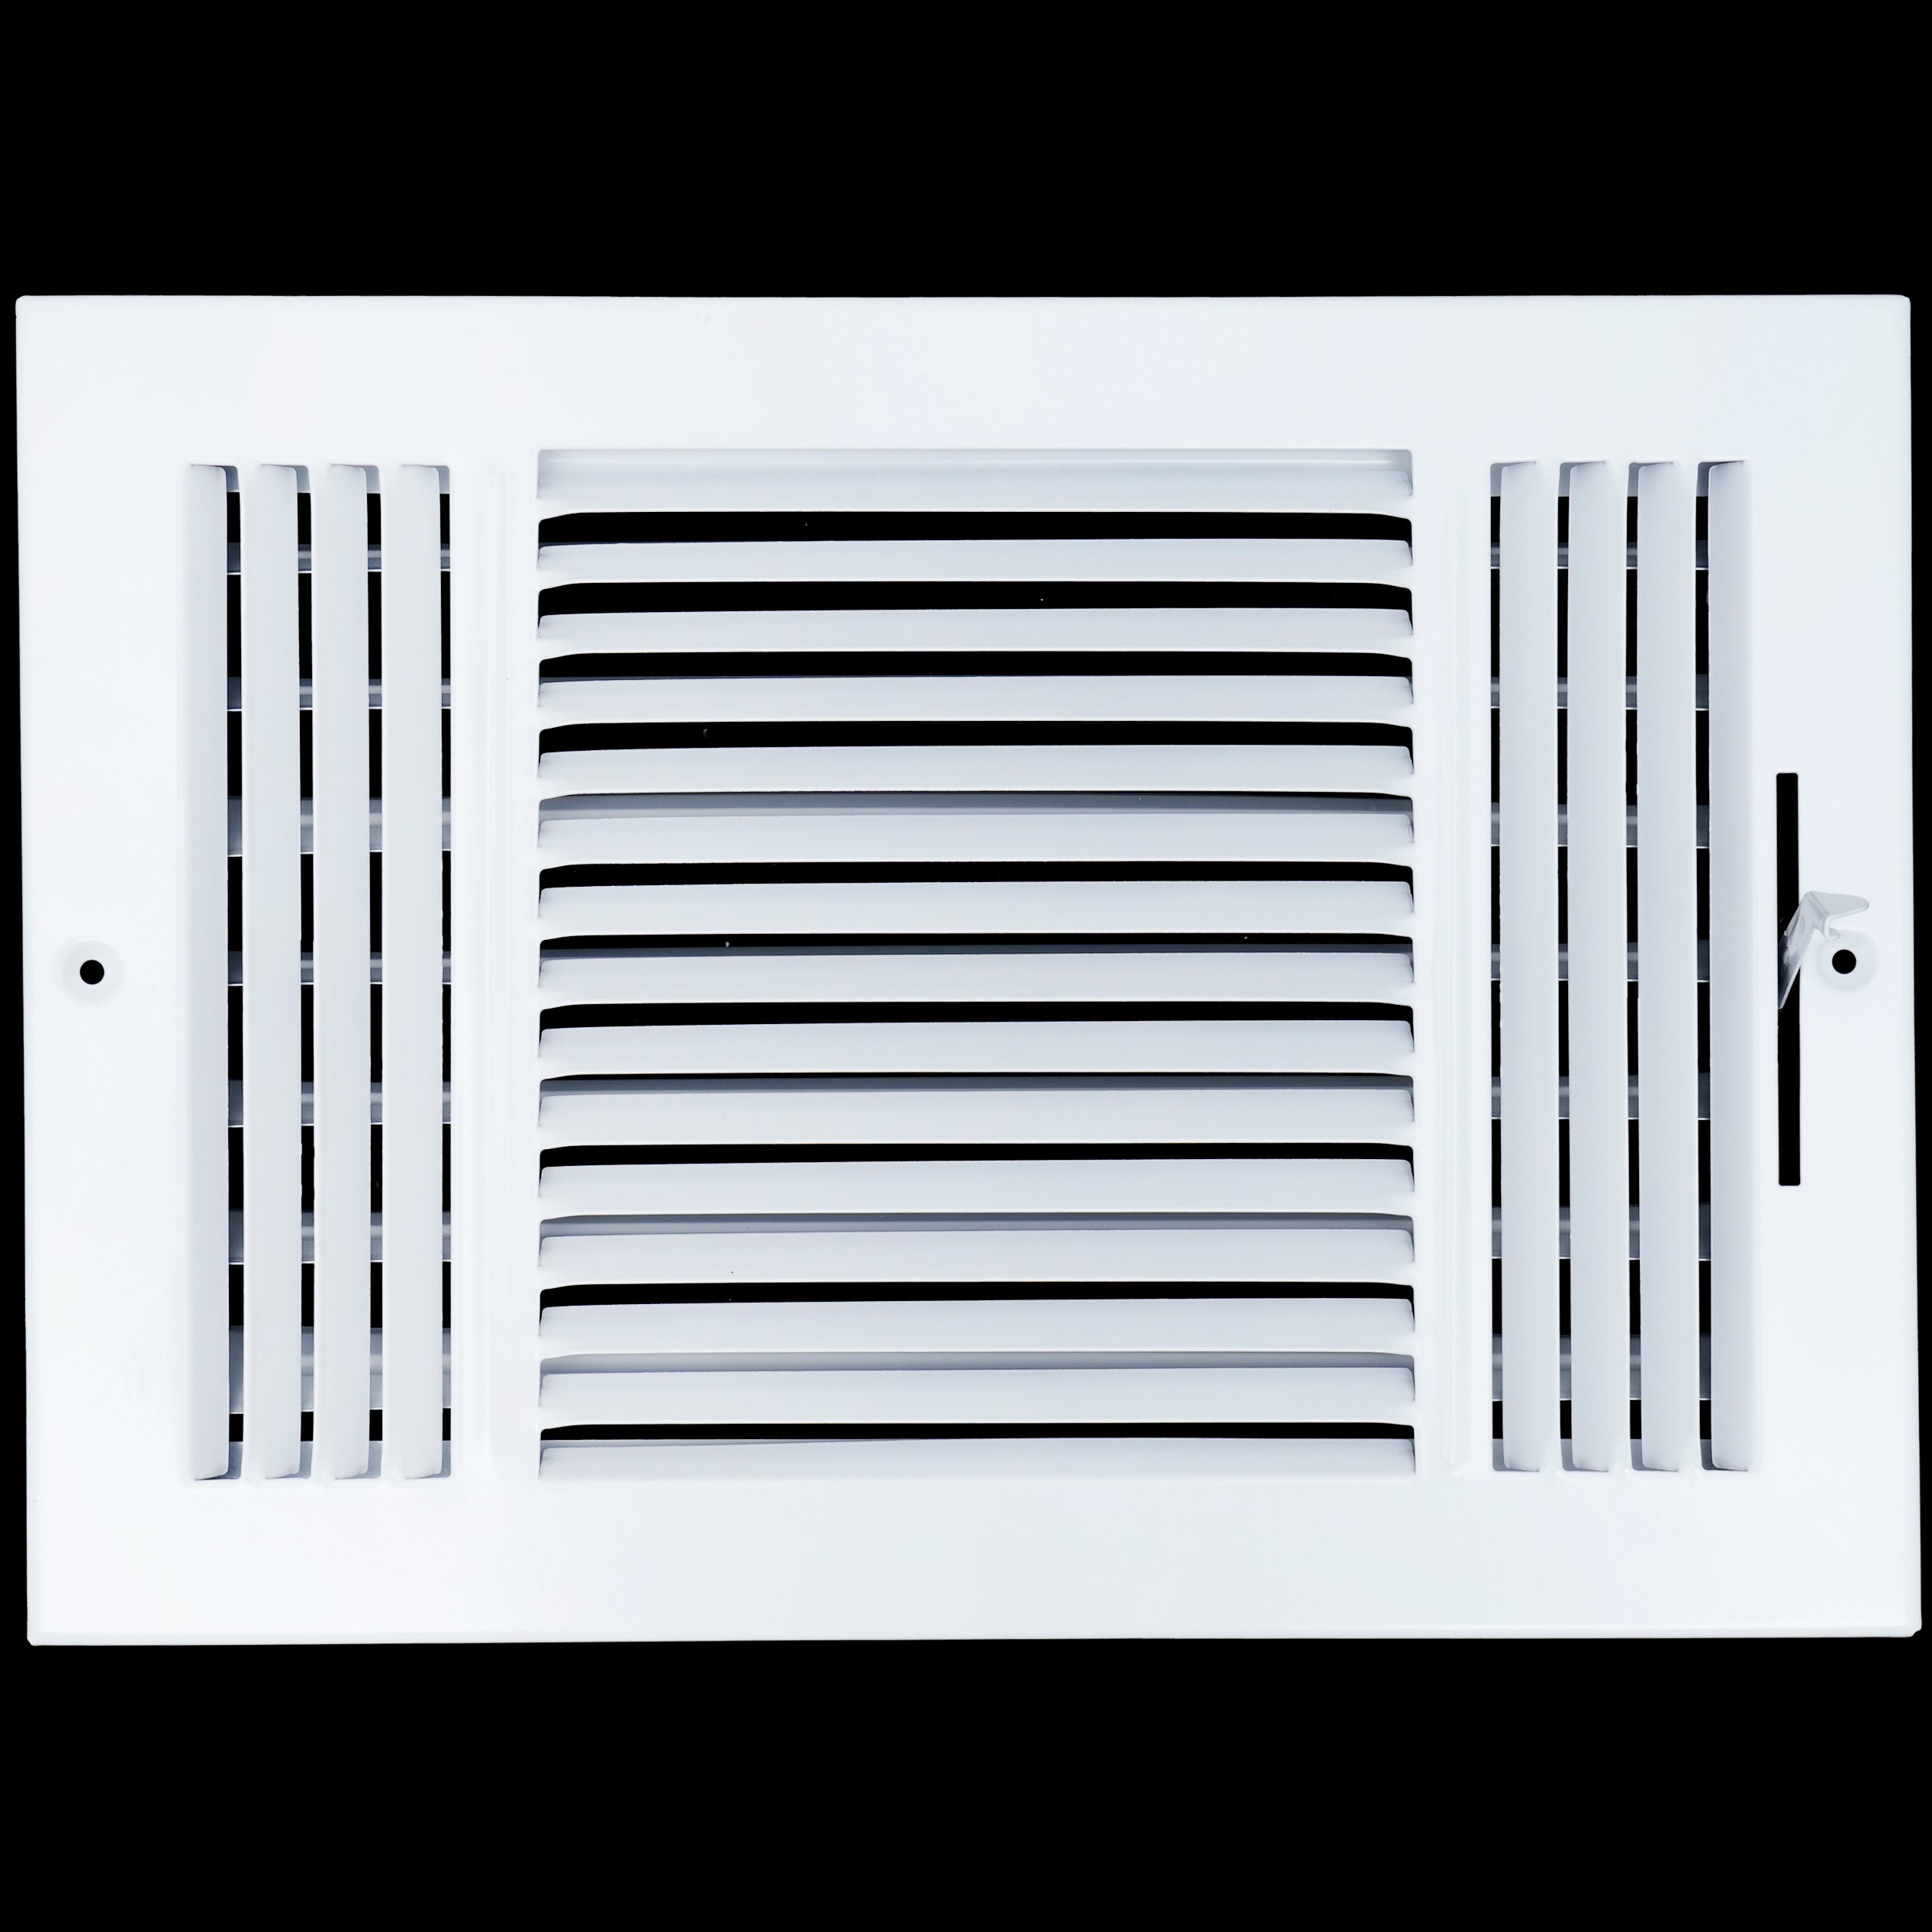 airgrilles 12 x 8 duct opening  -  3 way steel air supply diffuser for sidewall and ceiling hnd-asg-wh-3way-12x8 764613097504 - 1